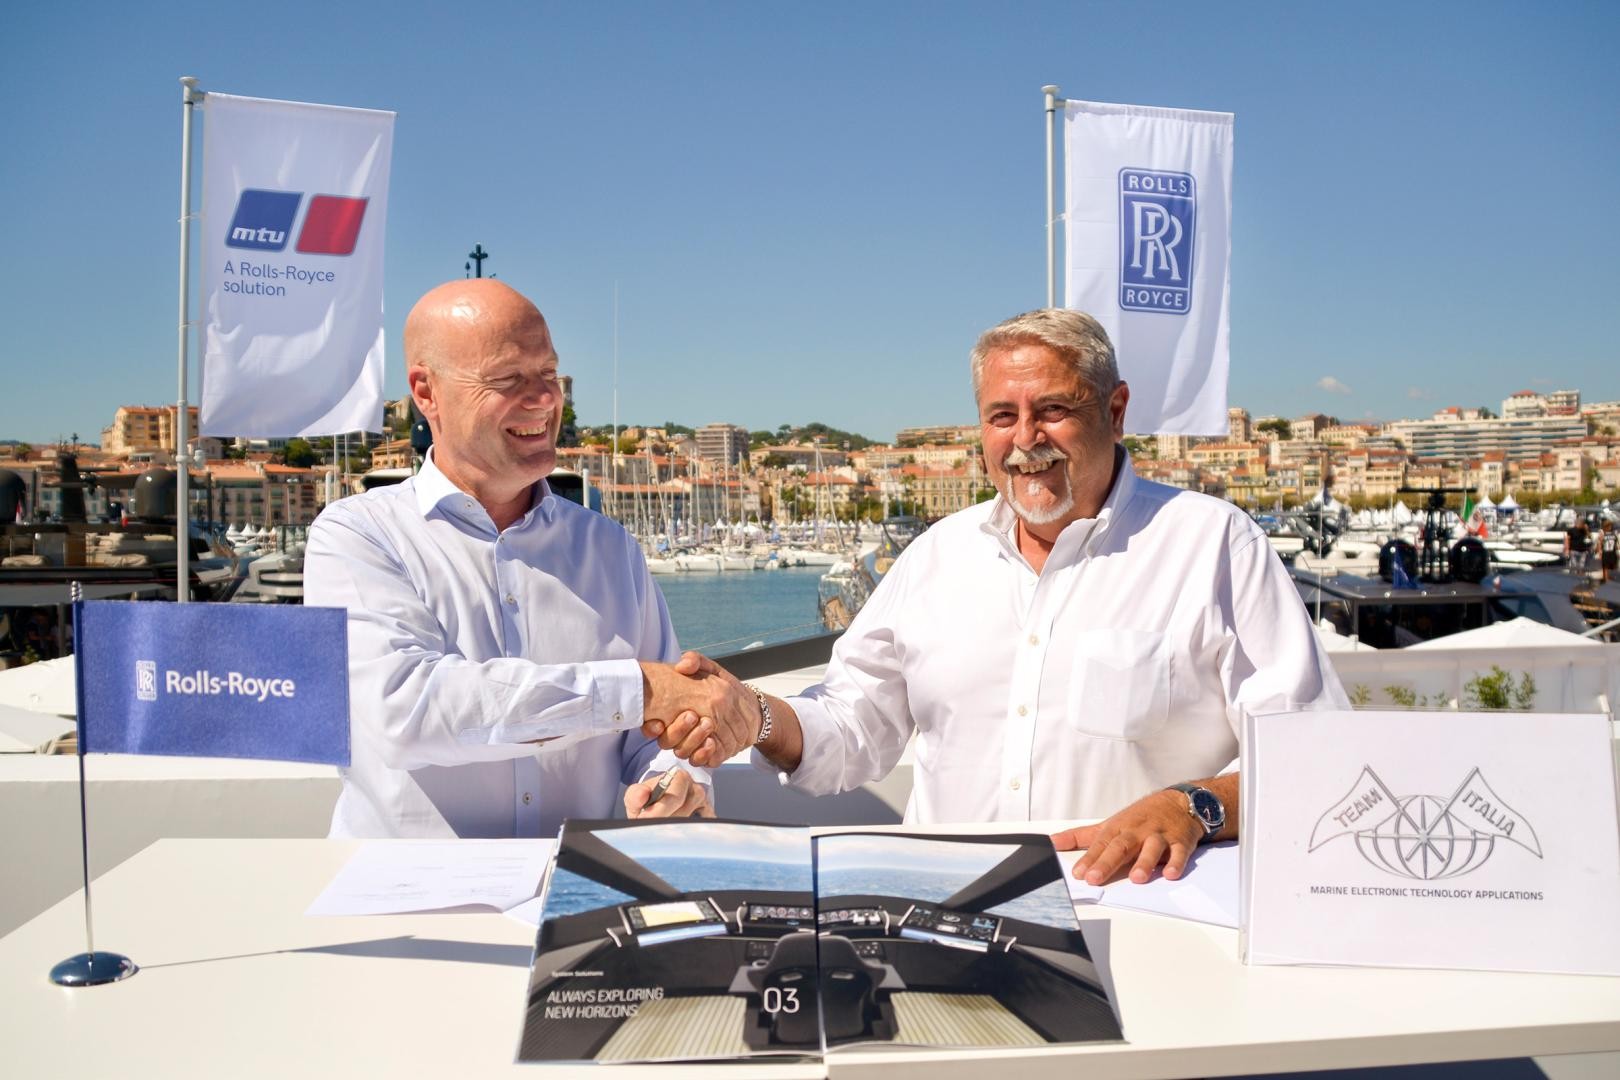 The Rolls-Royce Power Systems business unit and yacht bridge specialist Team Italia are joining forces